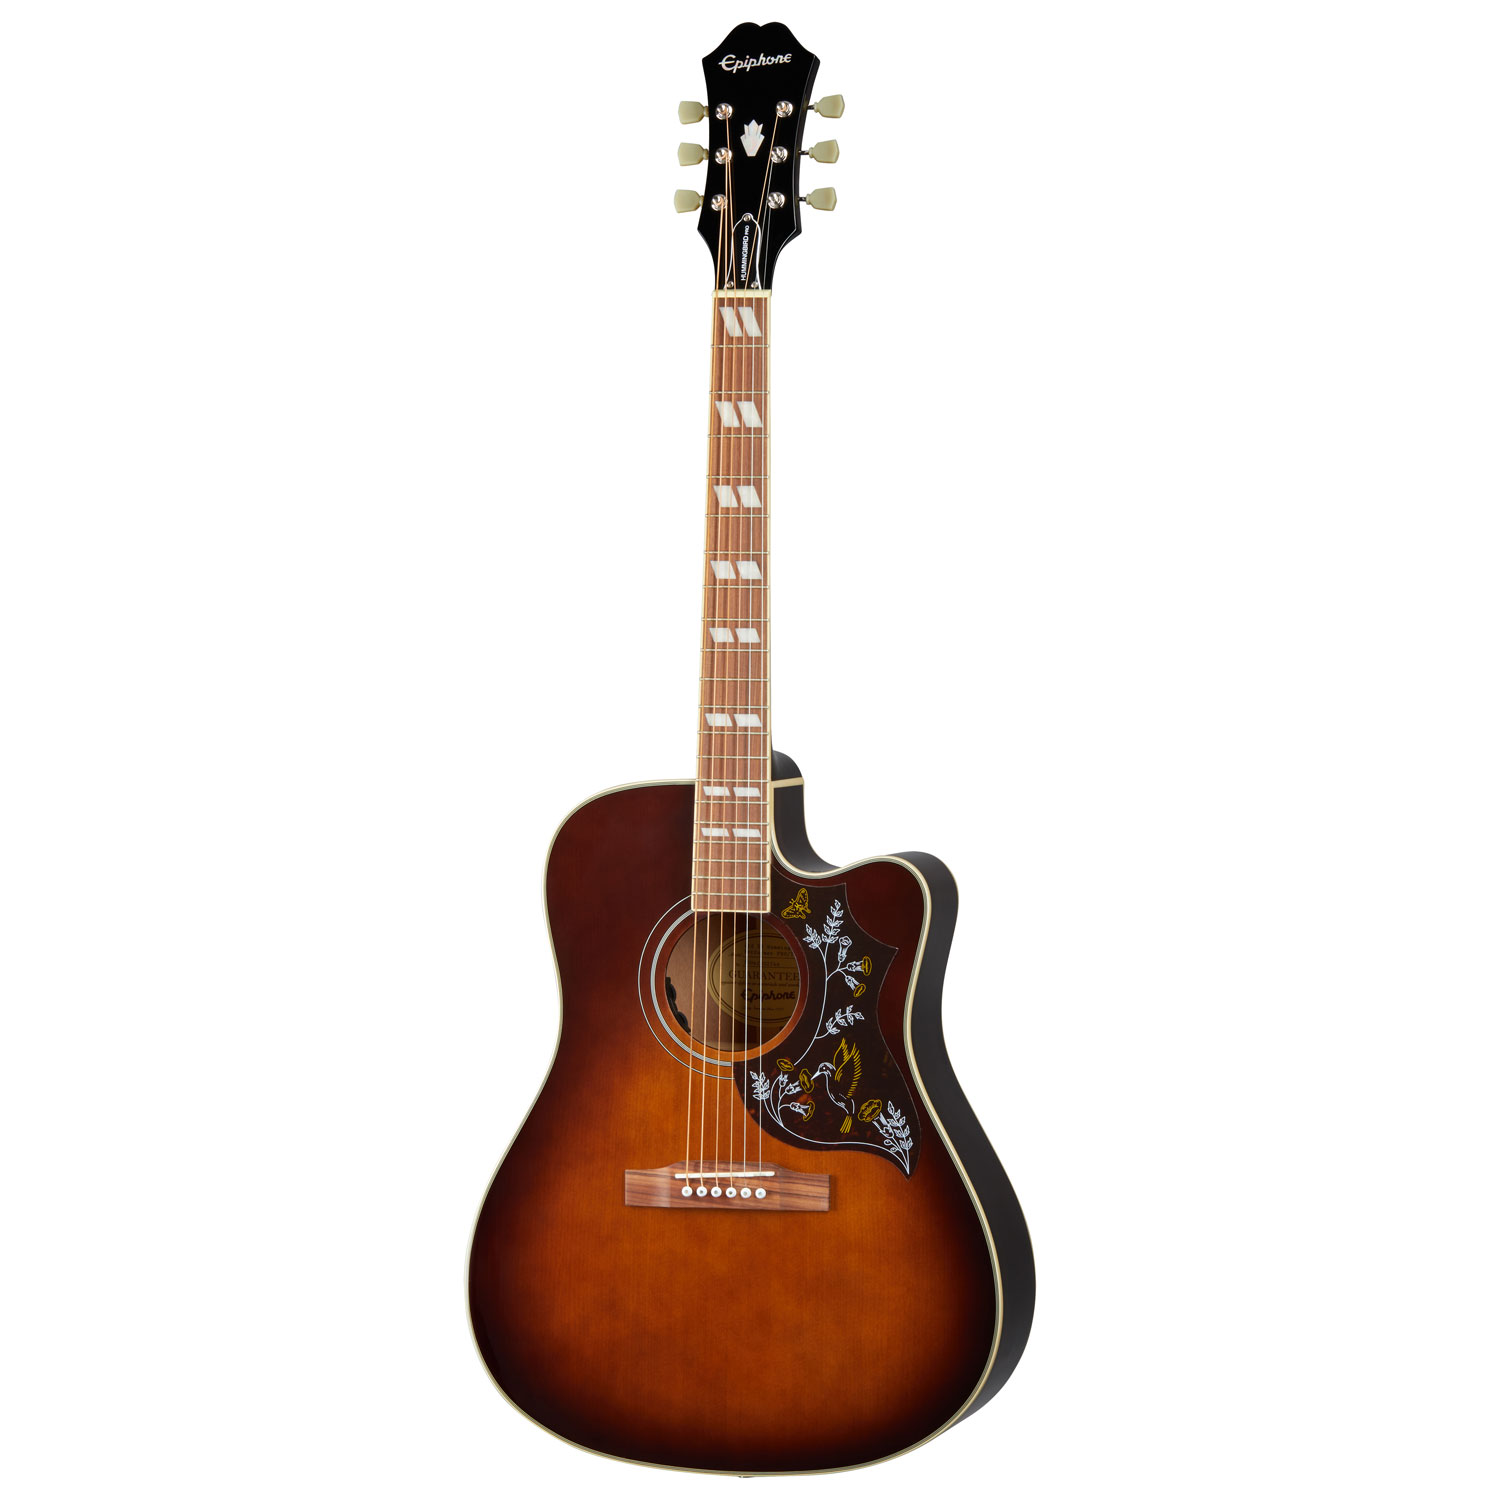 Epiphone Hummingbird Performer PRO Limited Edition Acoustic/Electric Guitar (EEHBTSNH3) - Tobacco Sunburst - Only at Best Buy